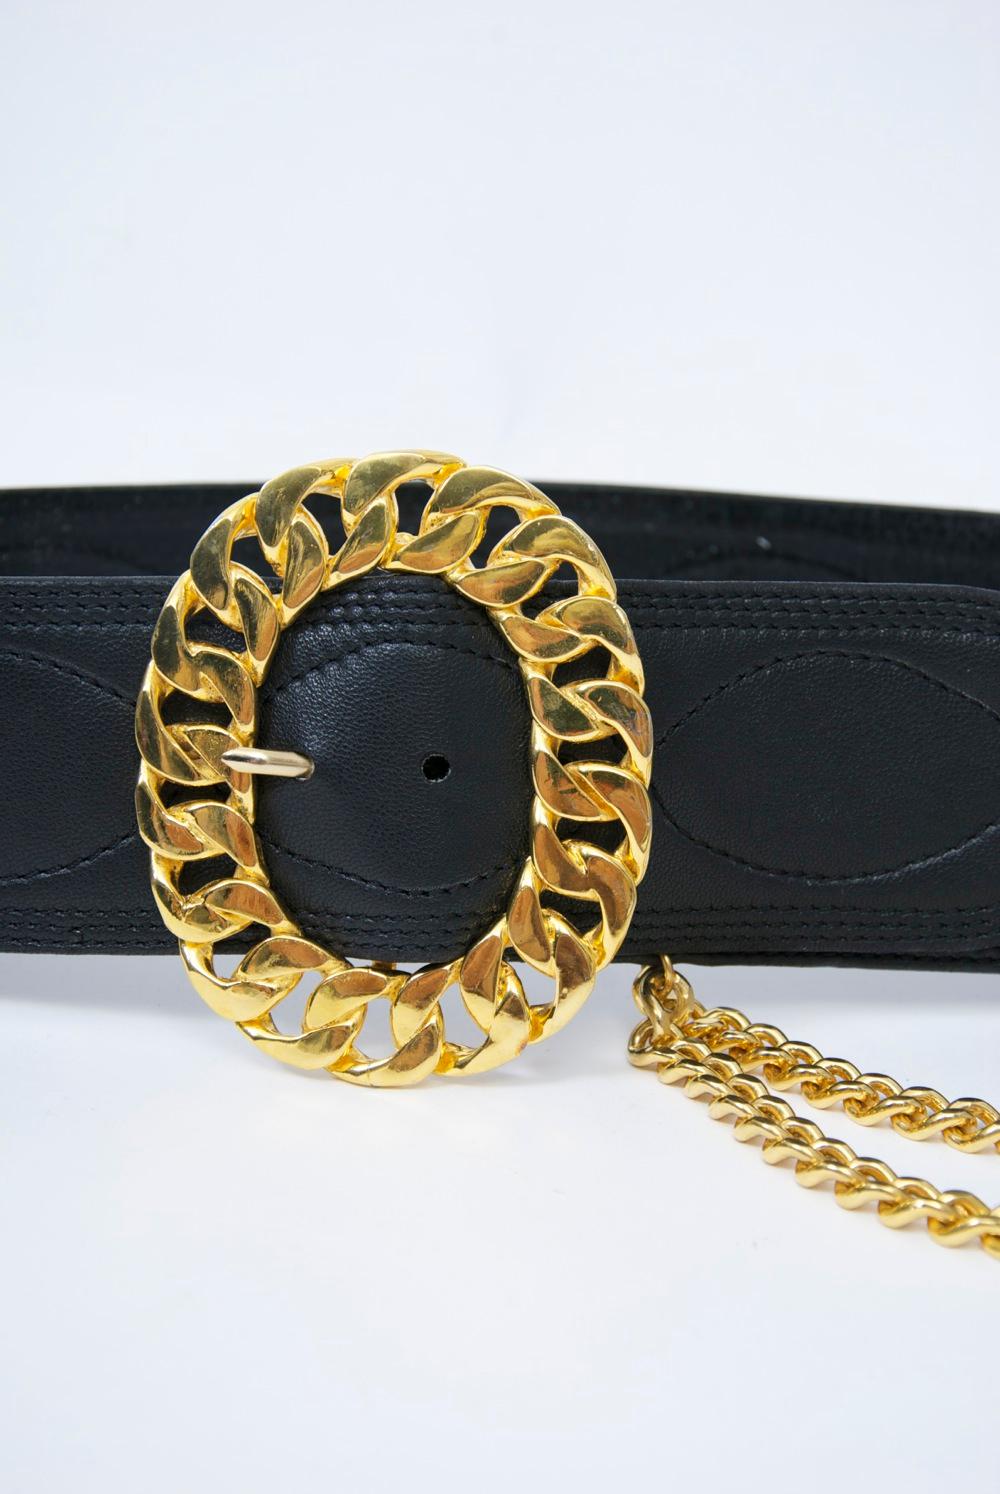 Jean L'Insolite black leather quilted belt with gold metal oval link buckle and double gold chain swag suspending a coin. Approximate waist size 29-31